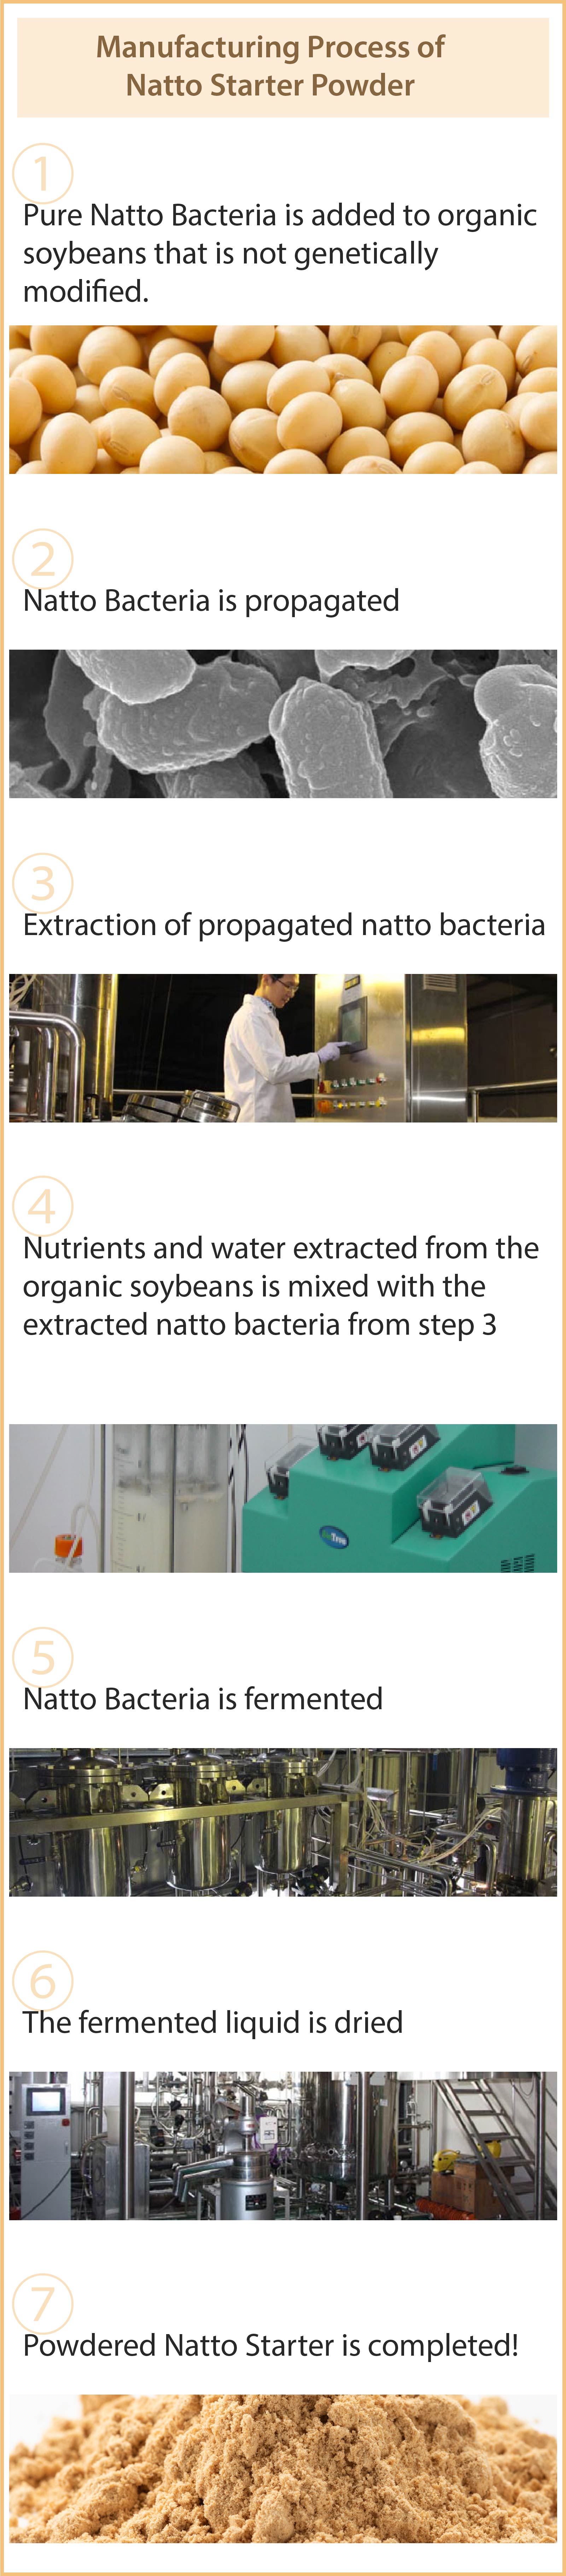 The Manufacture Process of Natto Starter Powder